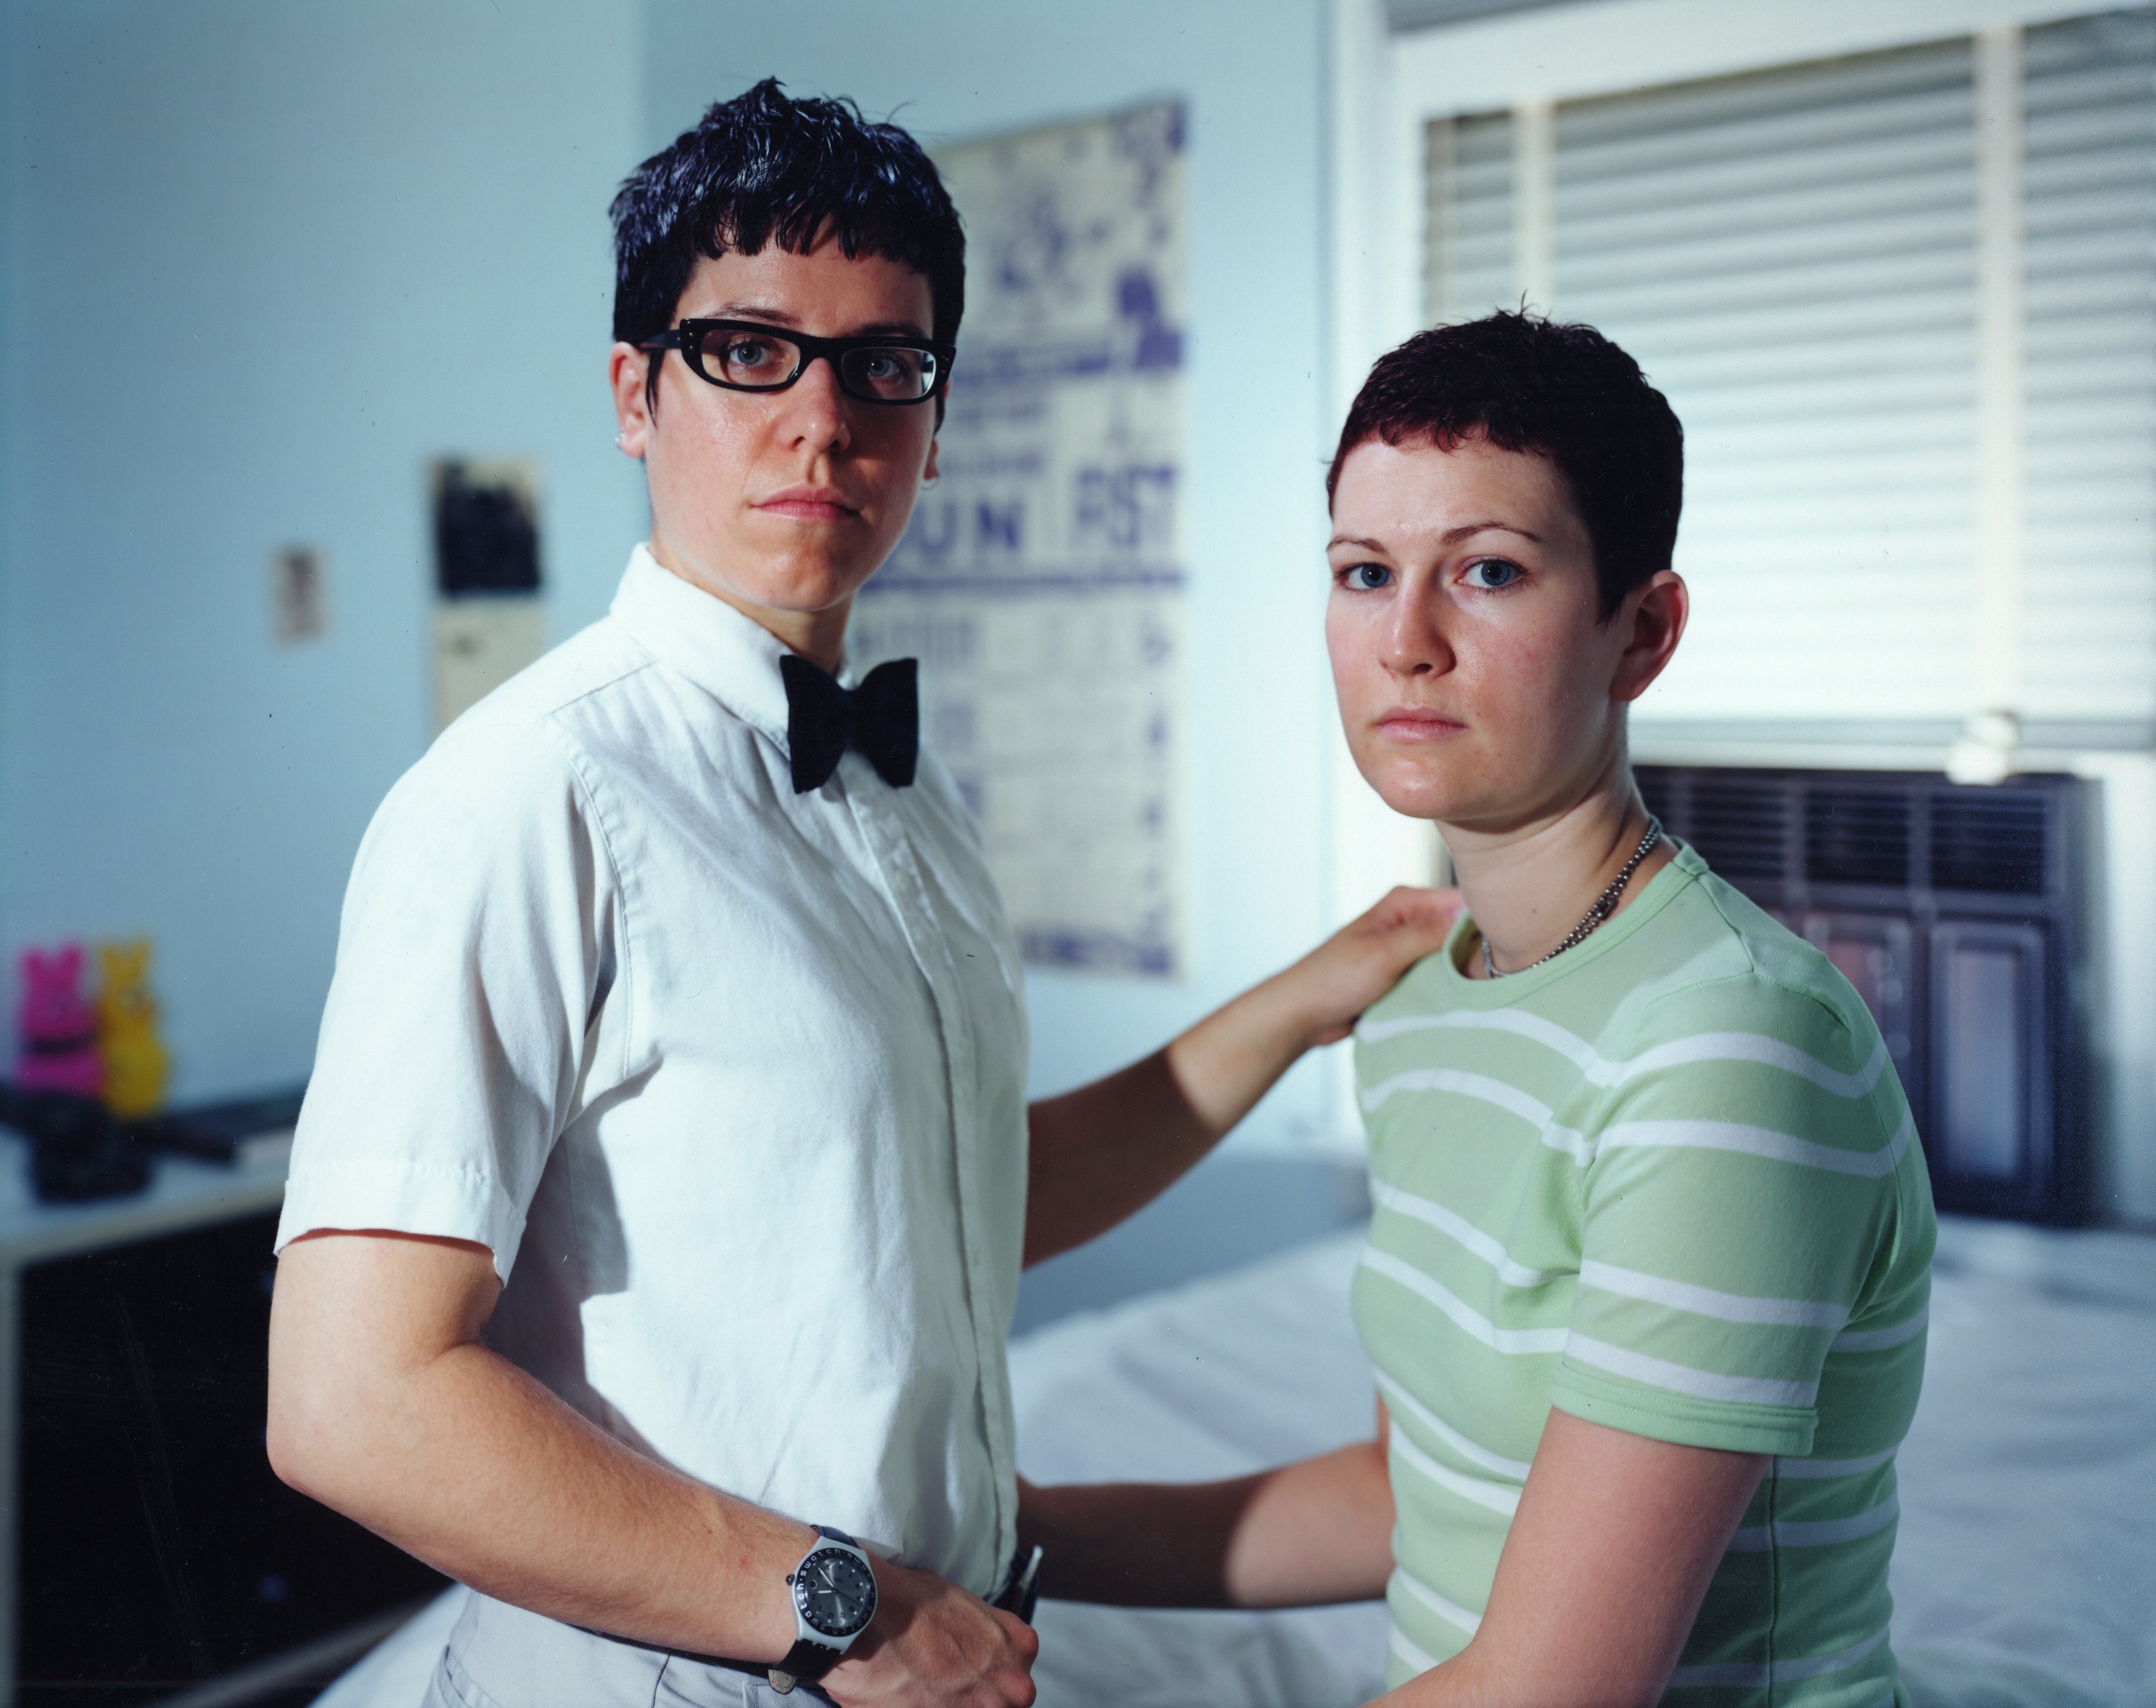 A young lesbian couple stand facing each other, hands on each other's hip and shoulder, heads turned towards the camera.